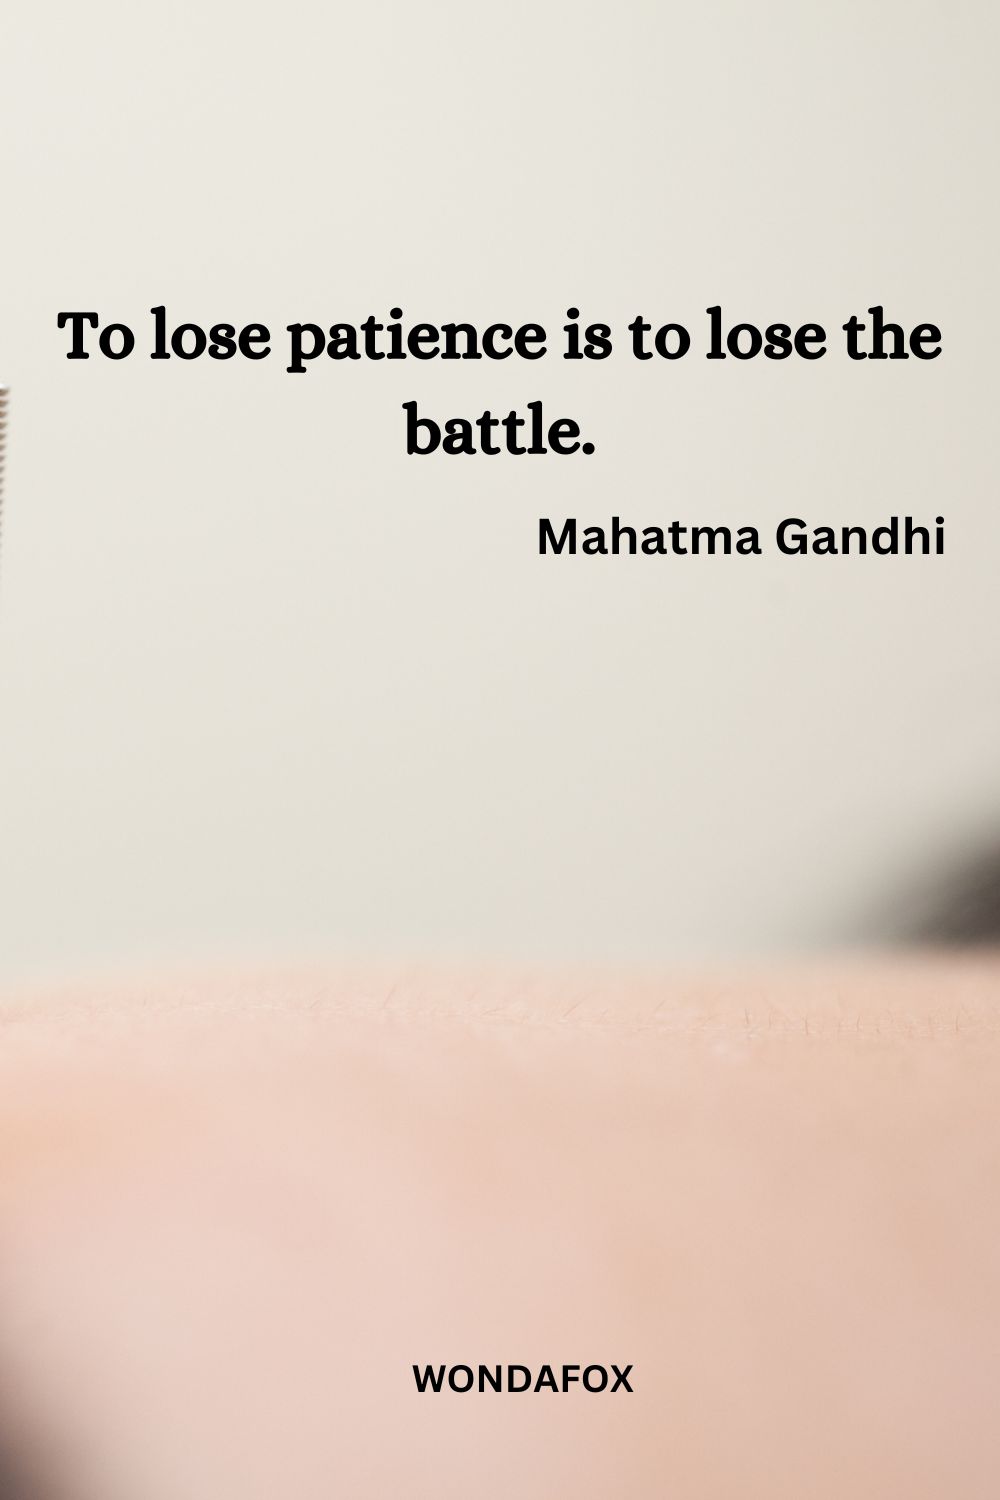 To lose patience is to lose the battle.
Mahatma Gandhi